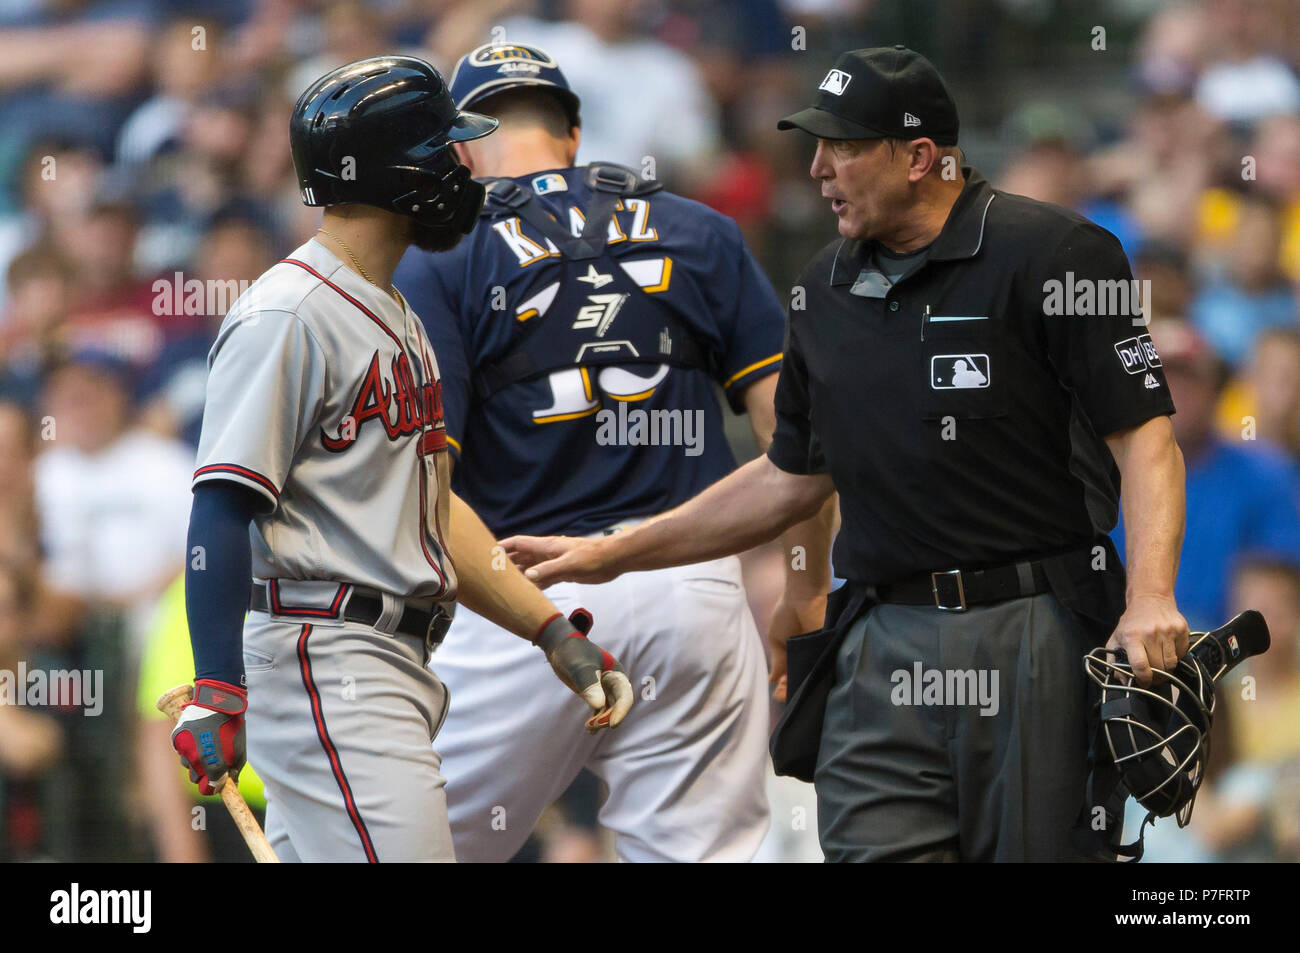 Milwaukee, WI, USA. 5th July, 2018. Atlanta Braves center fielder Ender Inciarte #11 argues a call with home plate umpire Jeff Kellogg during the Major League Baseball game between the Milwaukee Brewers and the Atlanta Braves at Miller Park in Milwaukee, WI. John Fisher/CSM/Alamy Live News Stock Photo